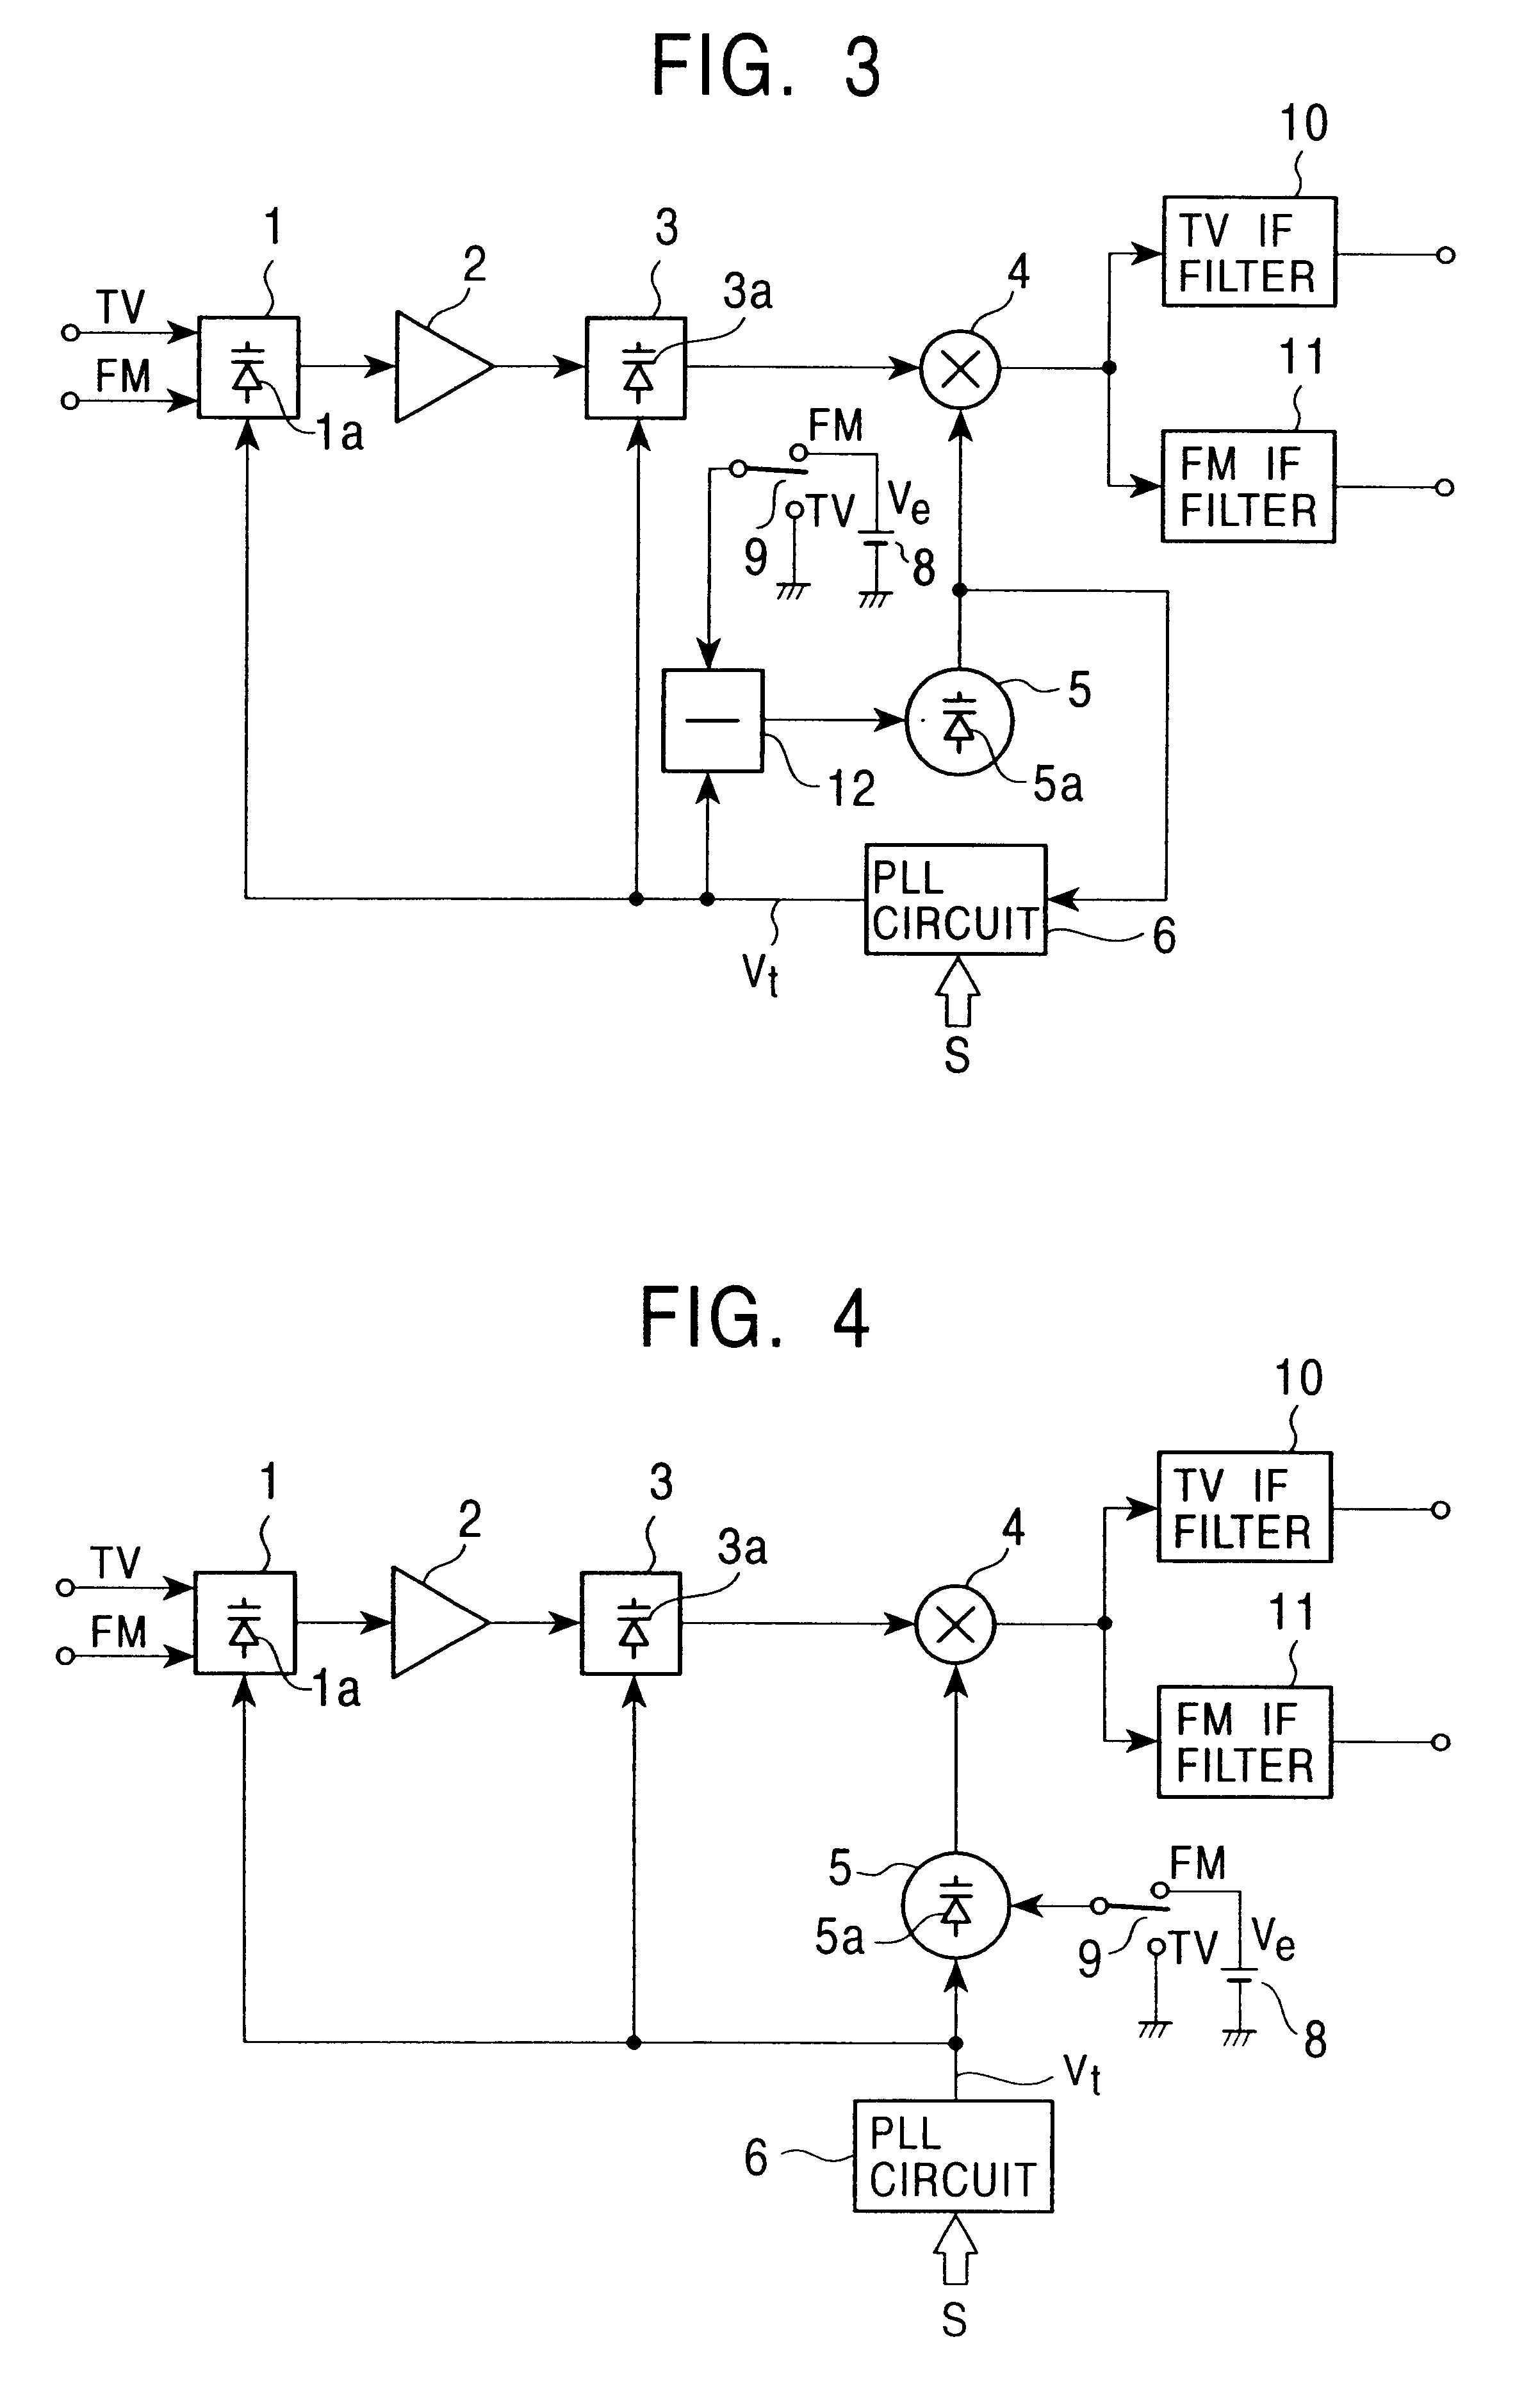 Television tuner having simple layout and capable of receiving FM broadcast signals without interference